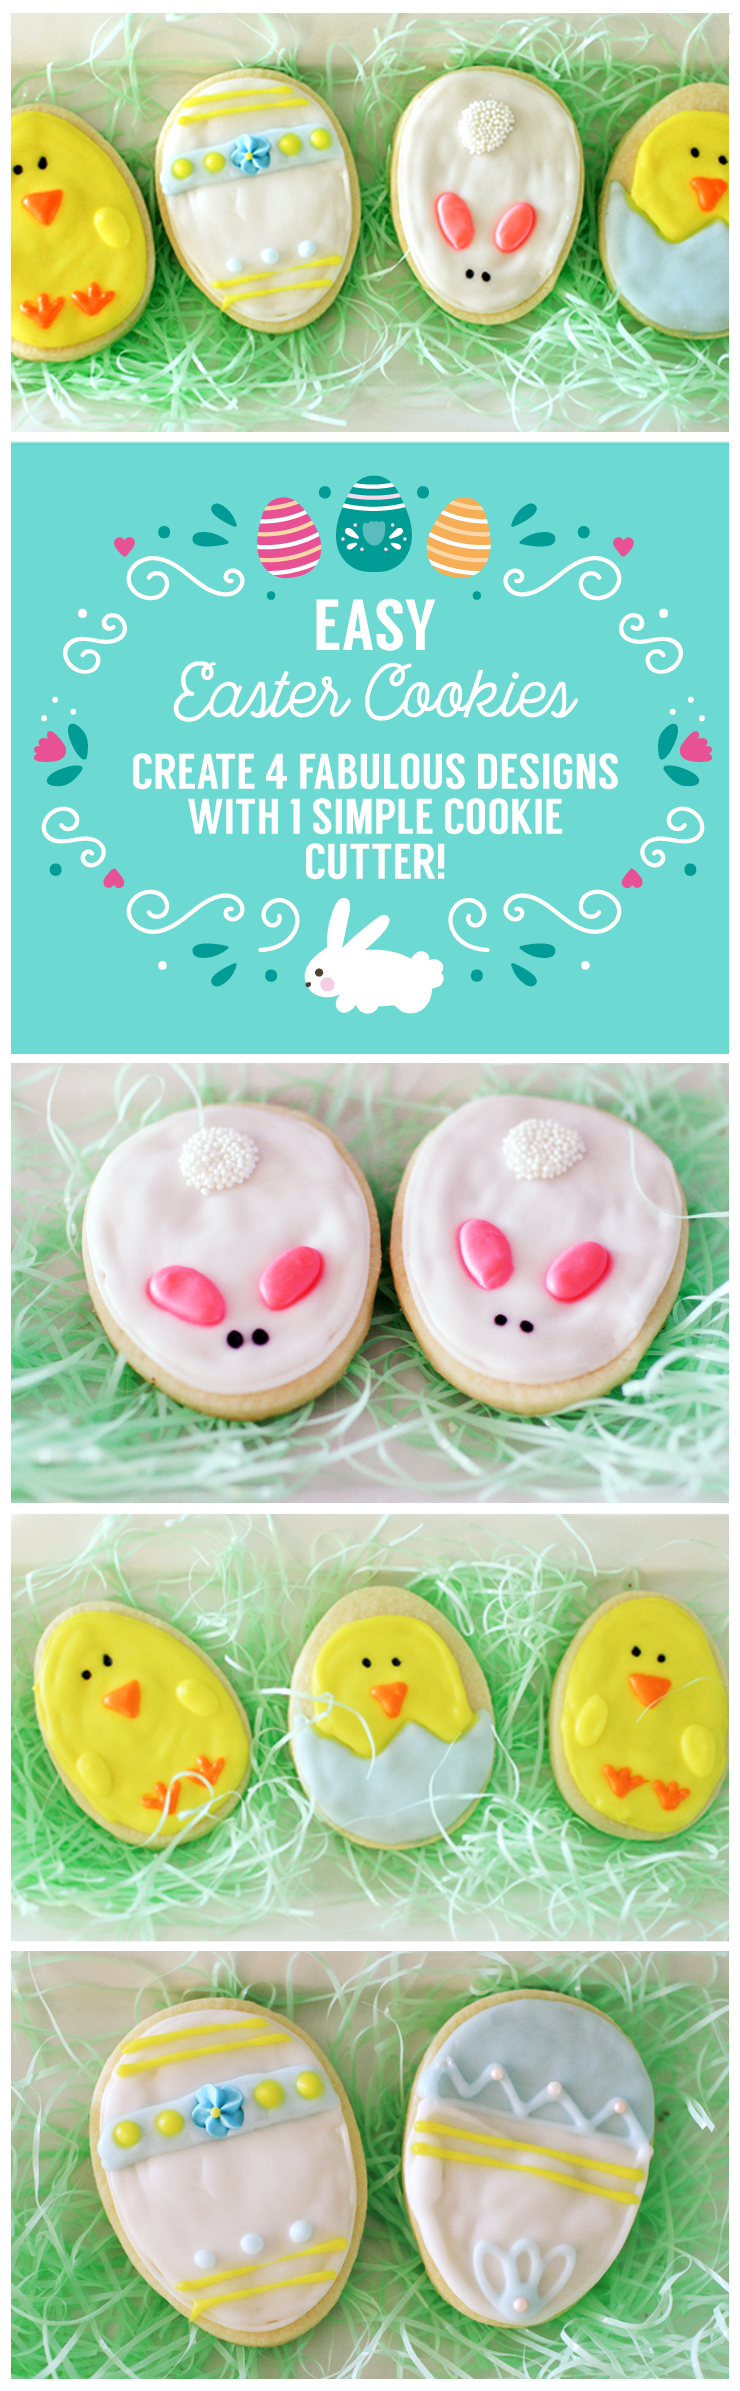 Easy Easter Cookies decorated 4 different ways. 